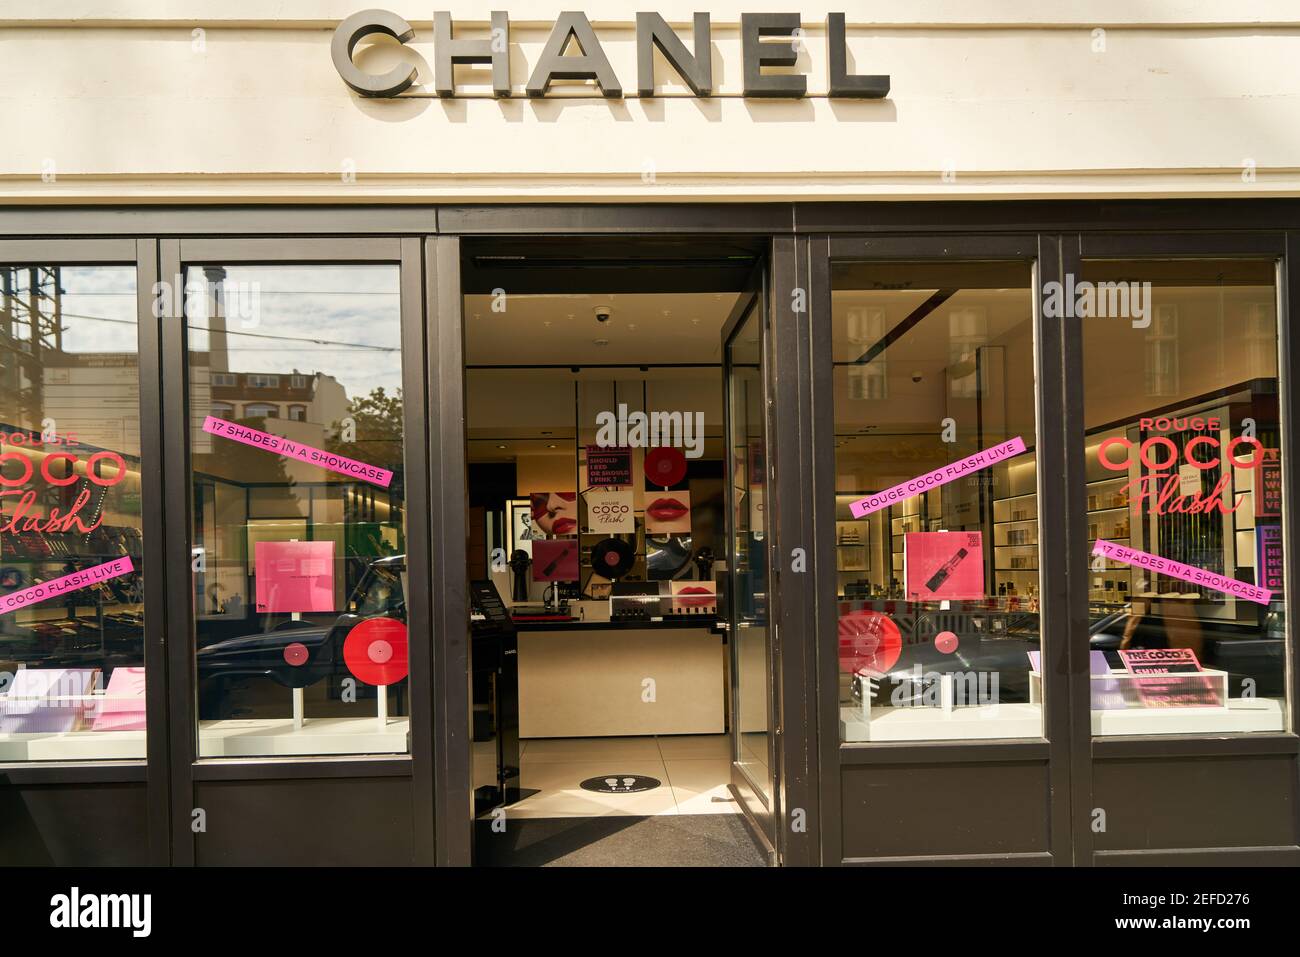 BERLIN, July 2020: Chanel brand store with open door at daytime Stock Photo  - Alamy